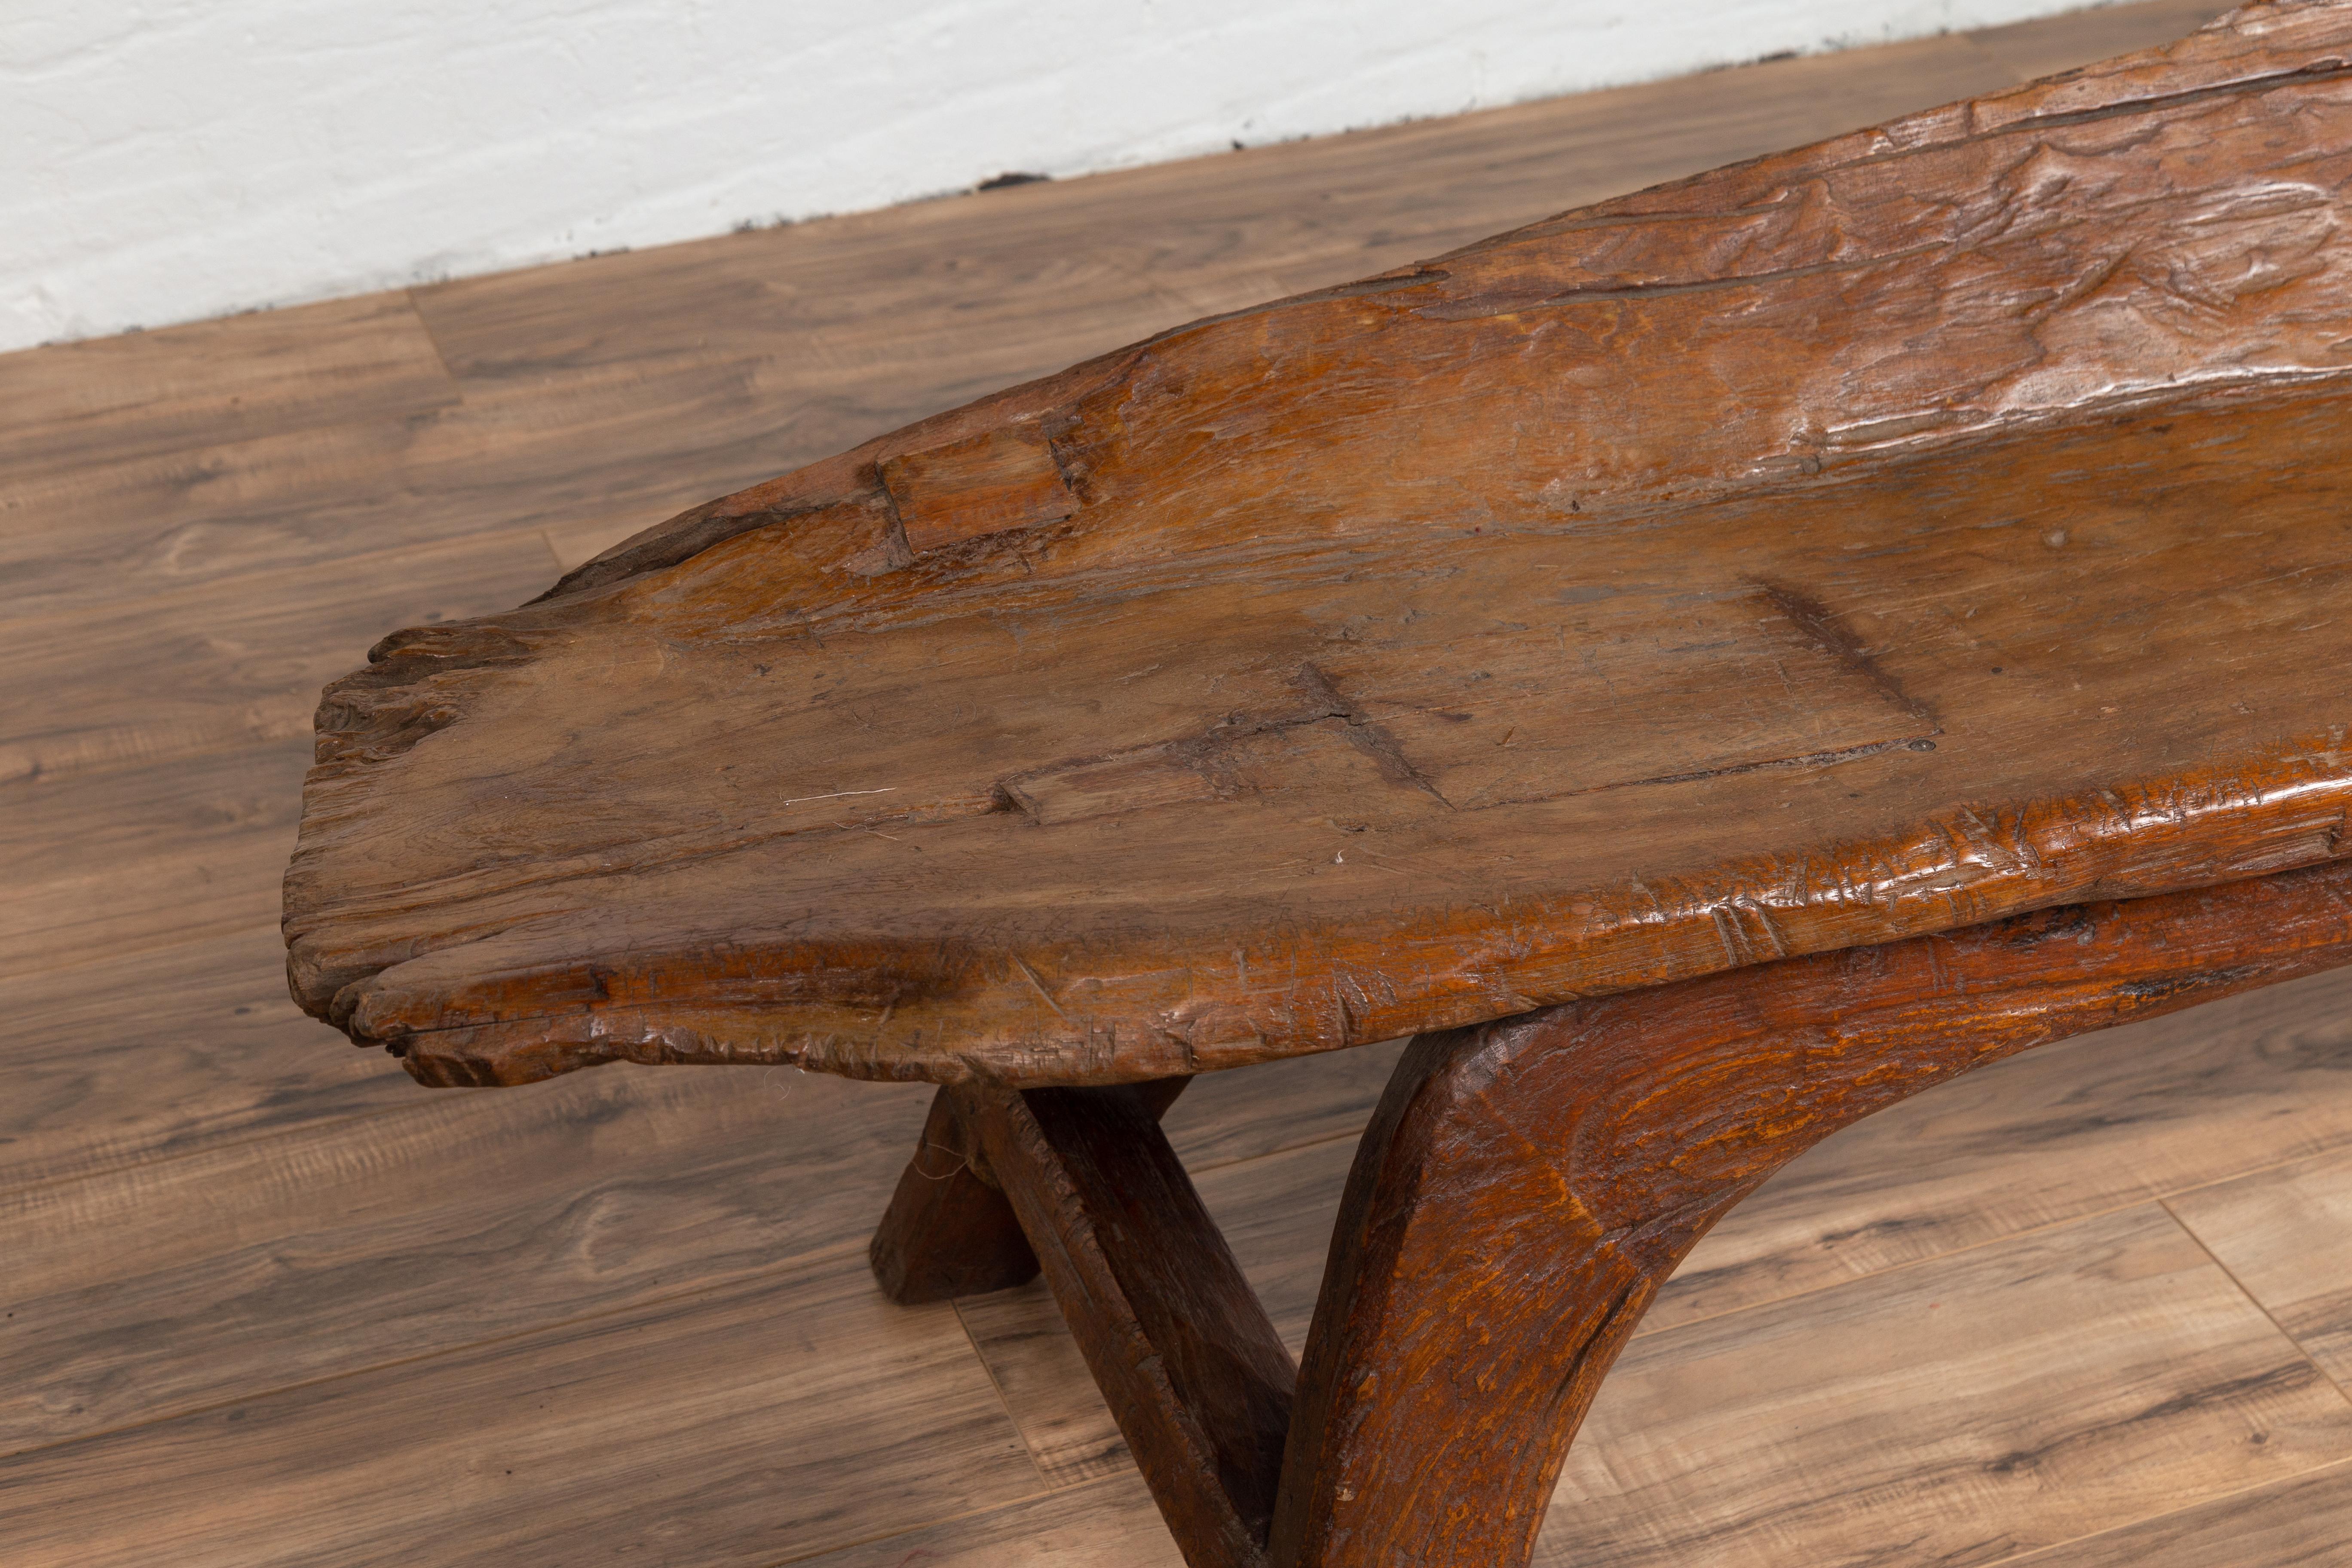 Rustic Freeform Design Antique Wooden Bench from the Riverbed of Bali with Arching Base